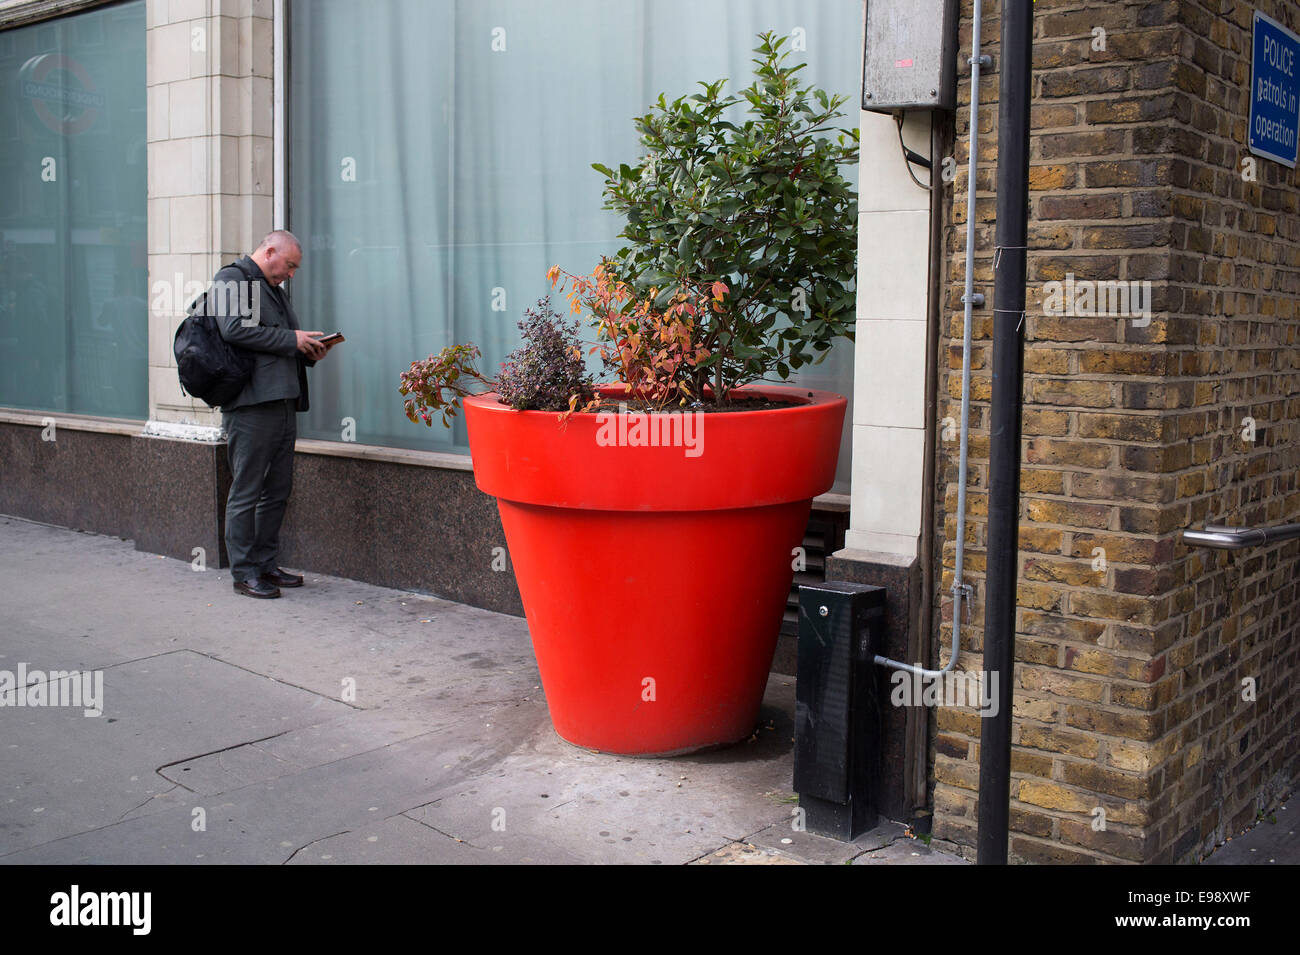 People on the streets interact with a large red plant pot in the City of London, UK. This situation creates a weird scale. Stock Photo